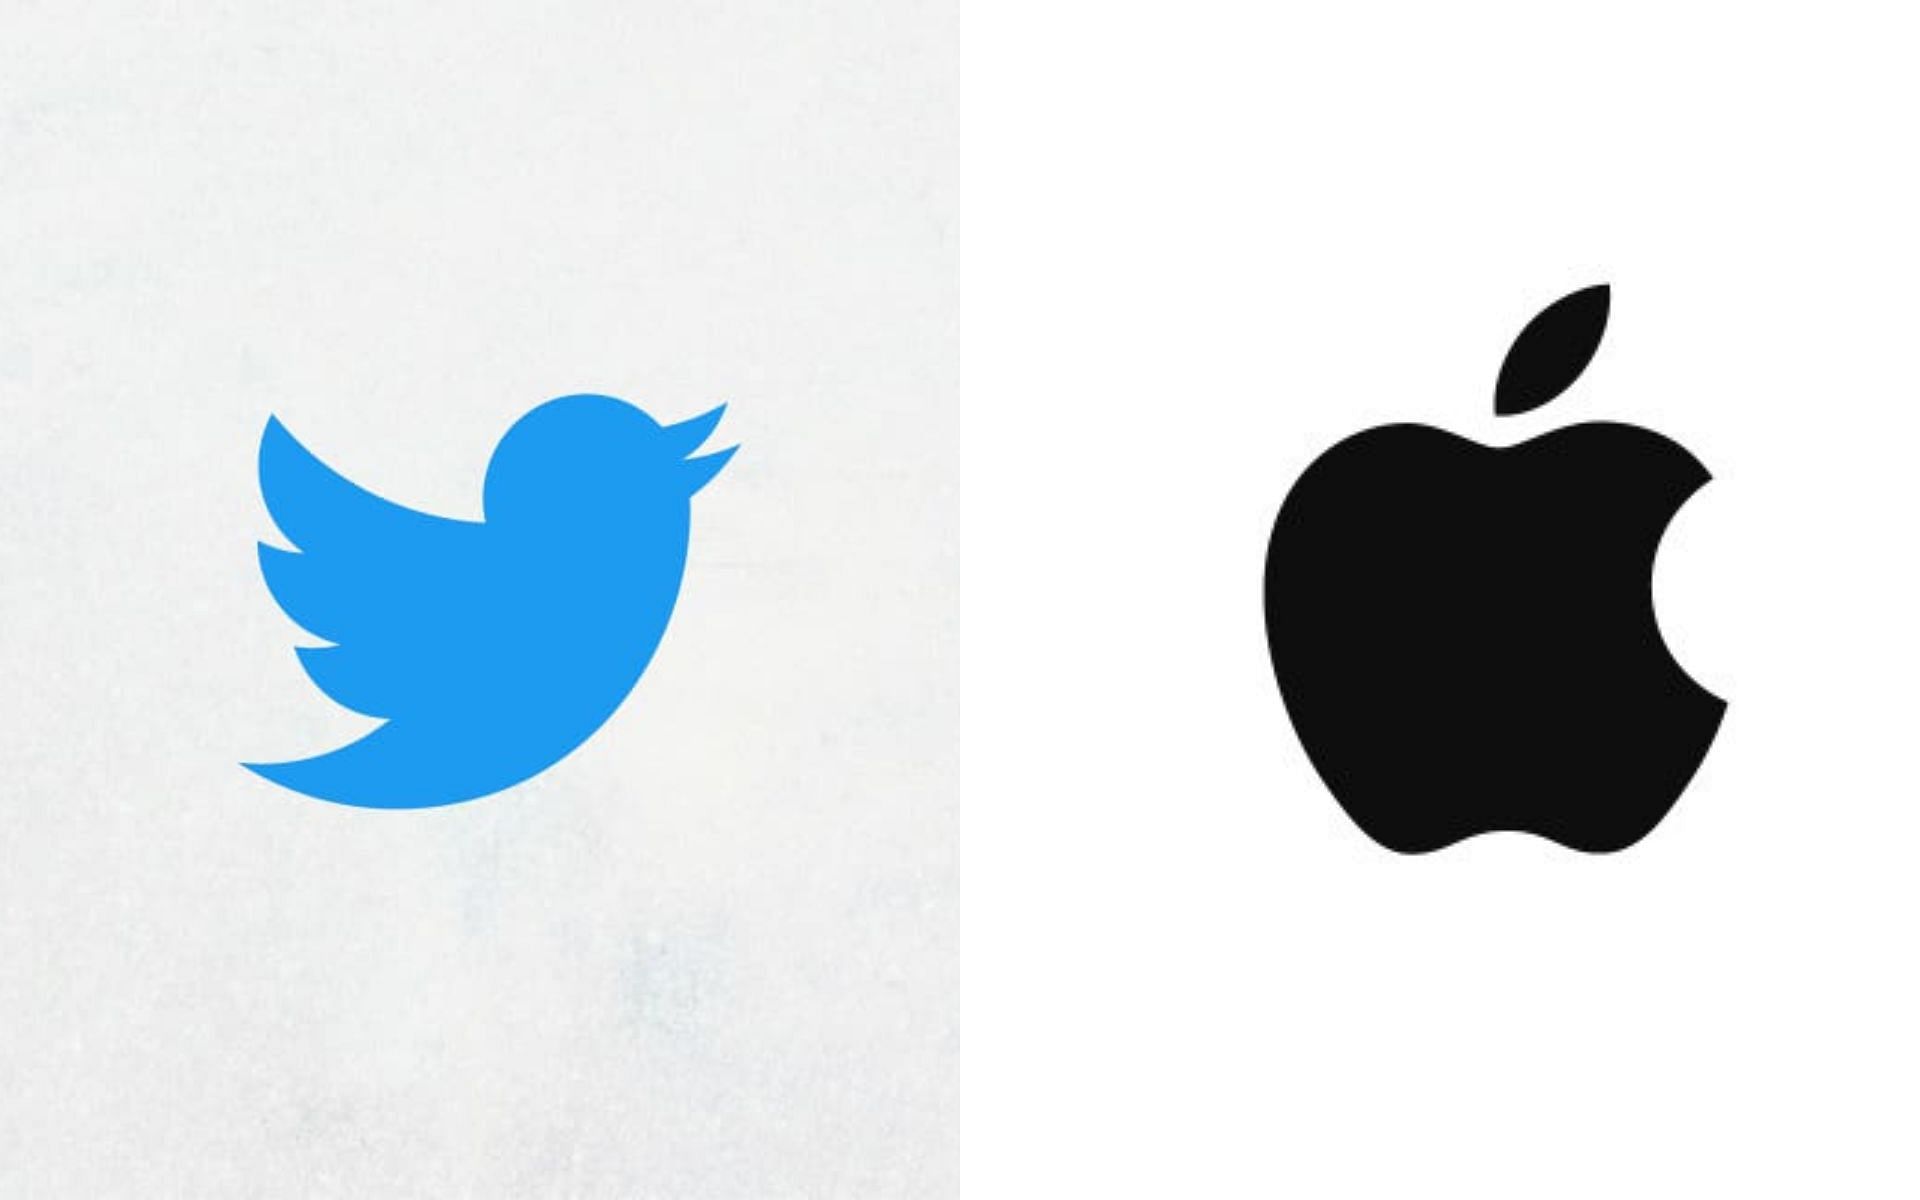 Former UFC fighter calls out Apple for trying to curb free speech on Twitter [Images via: @twitter and @apple on Twitter]